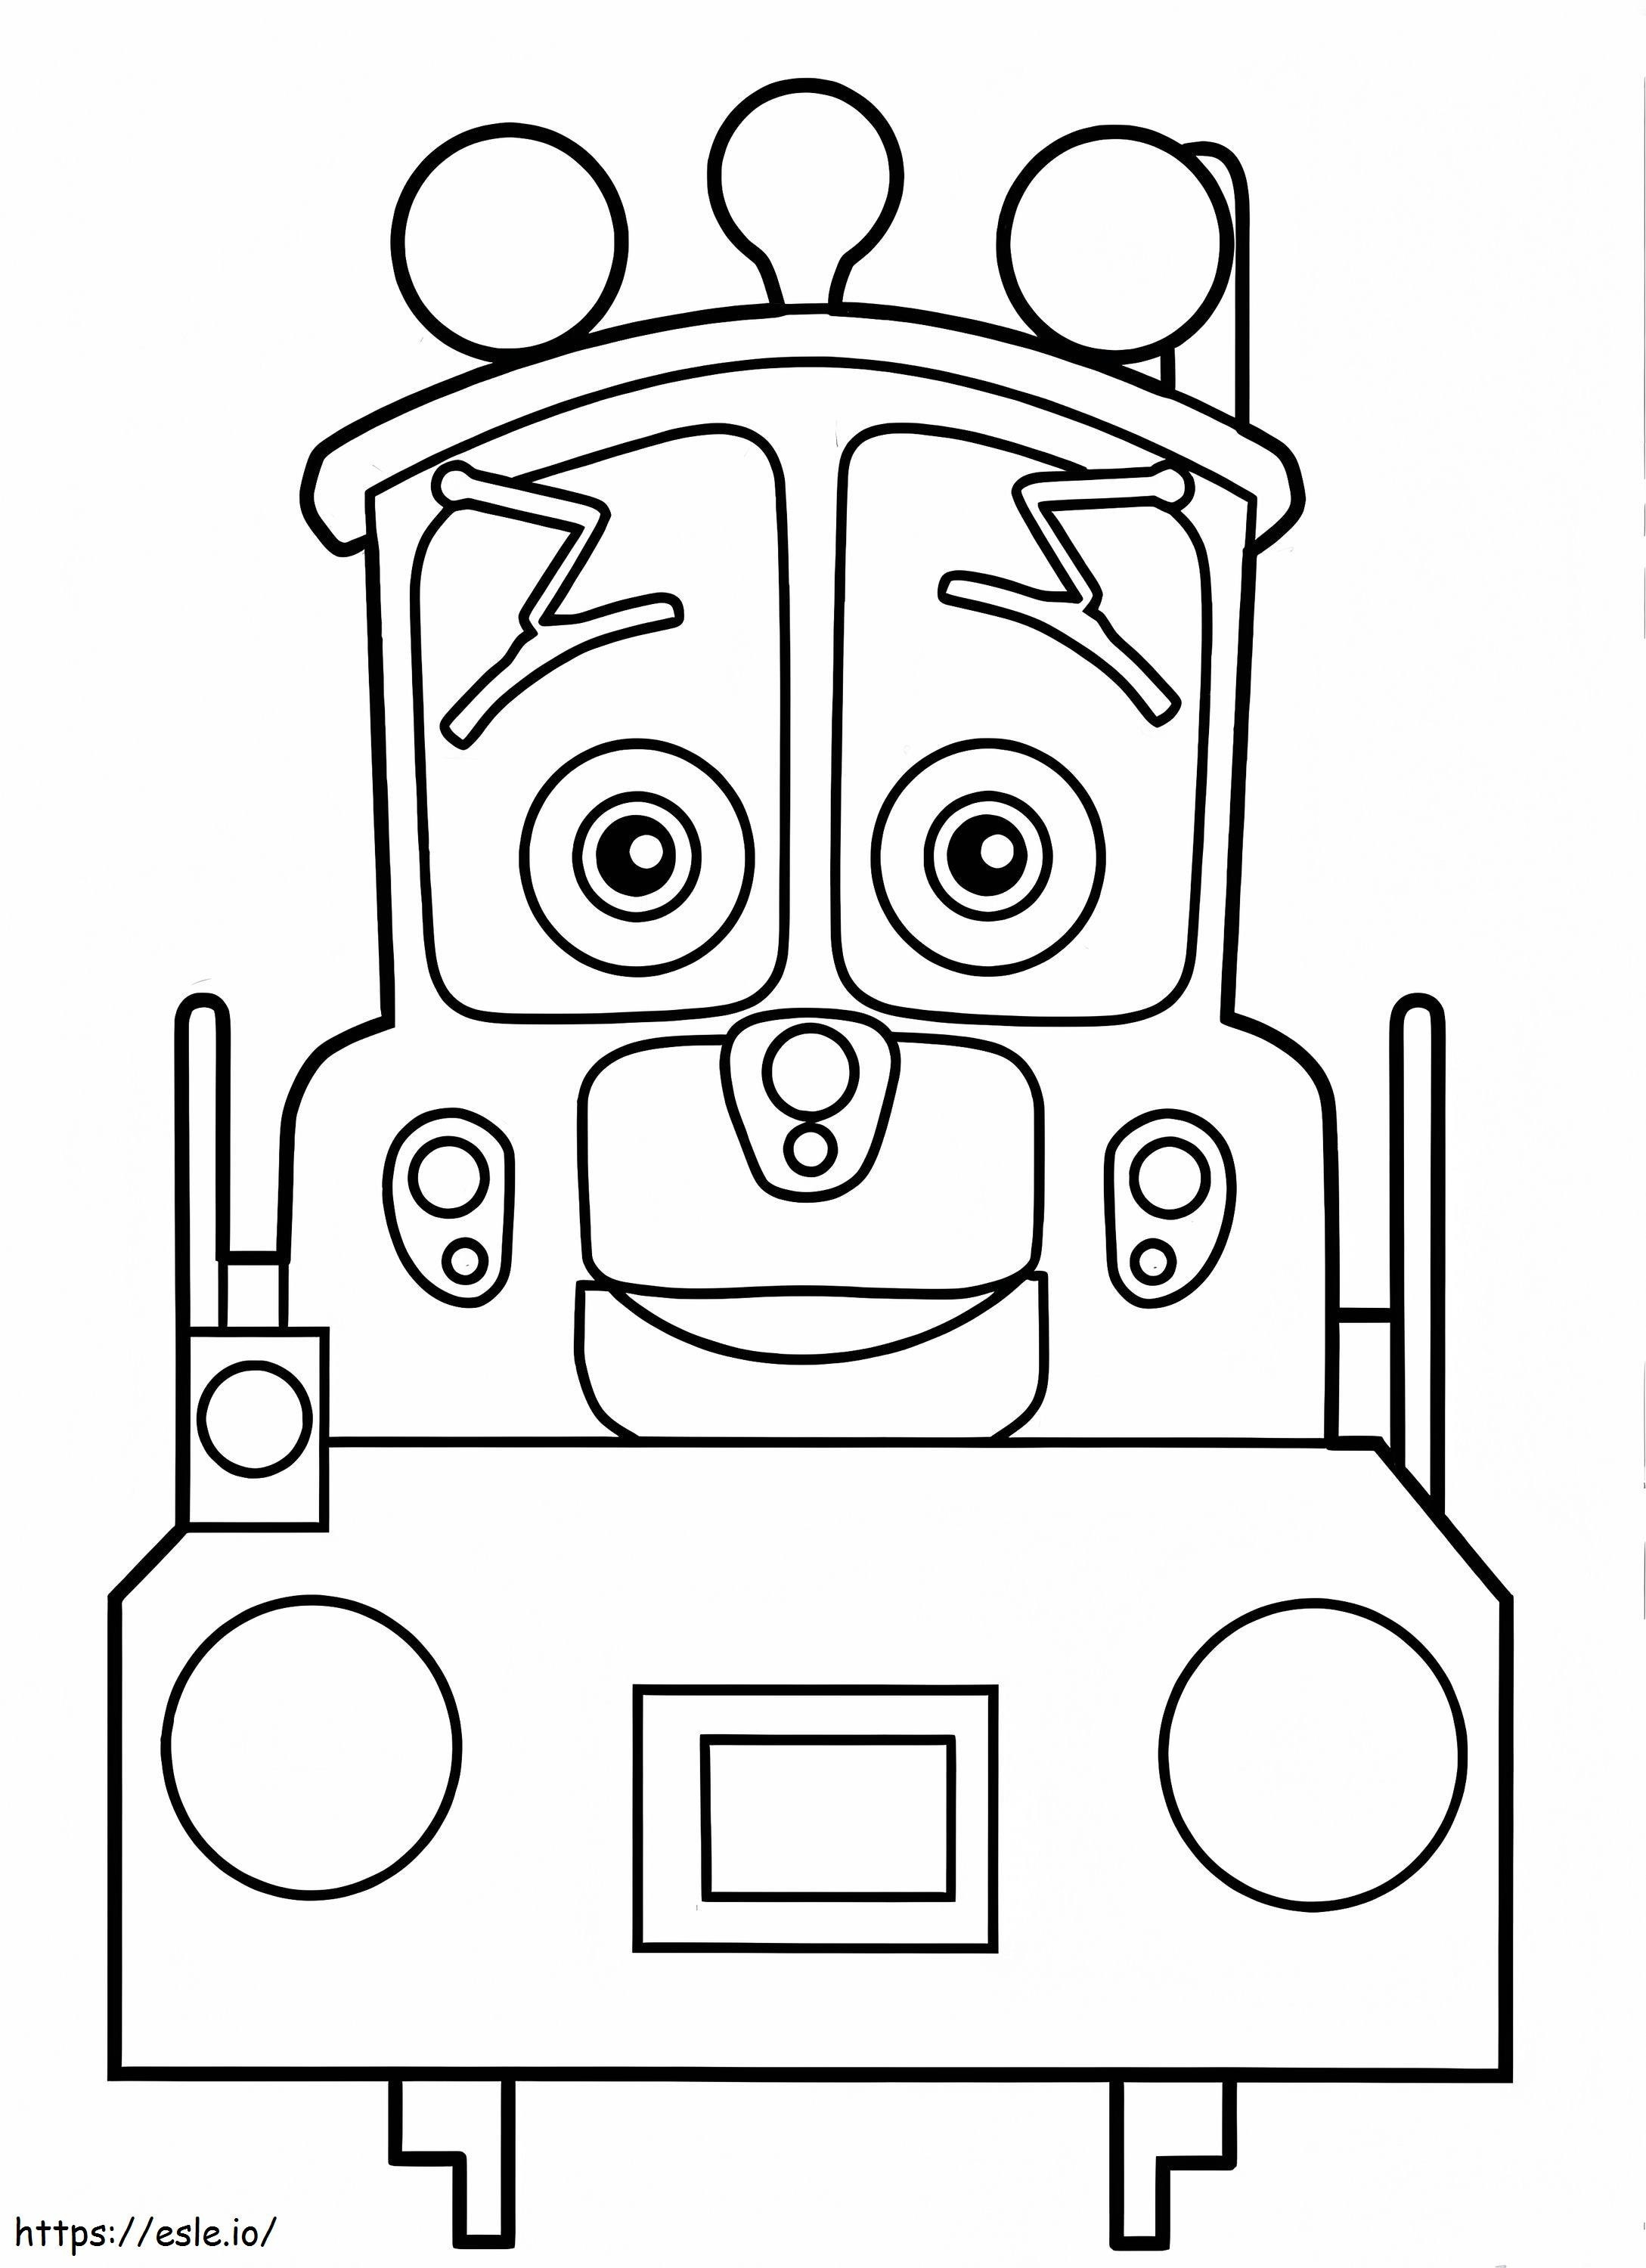 Calley In Chuggington coloring page